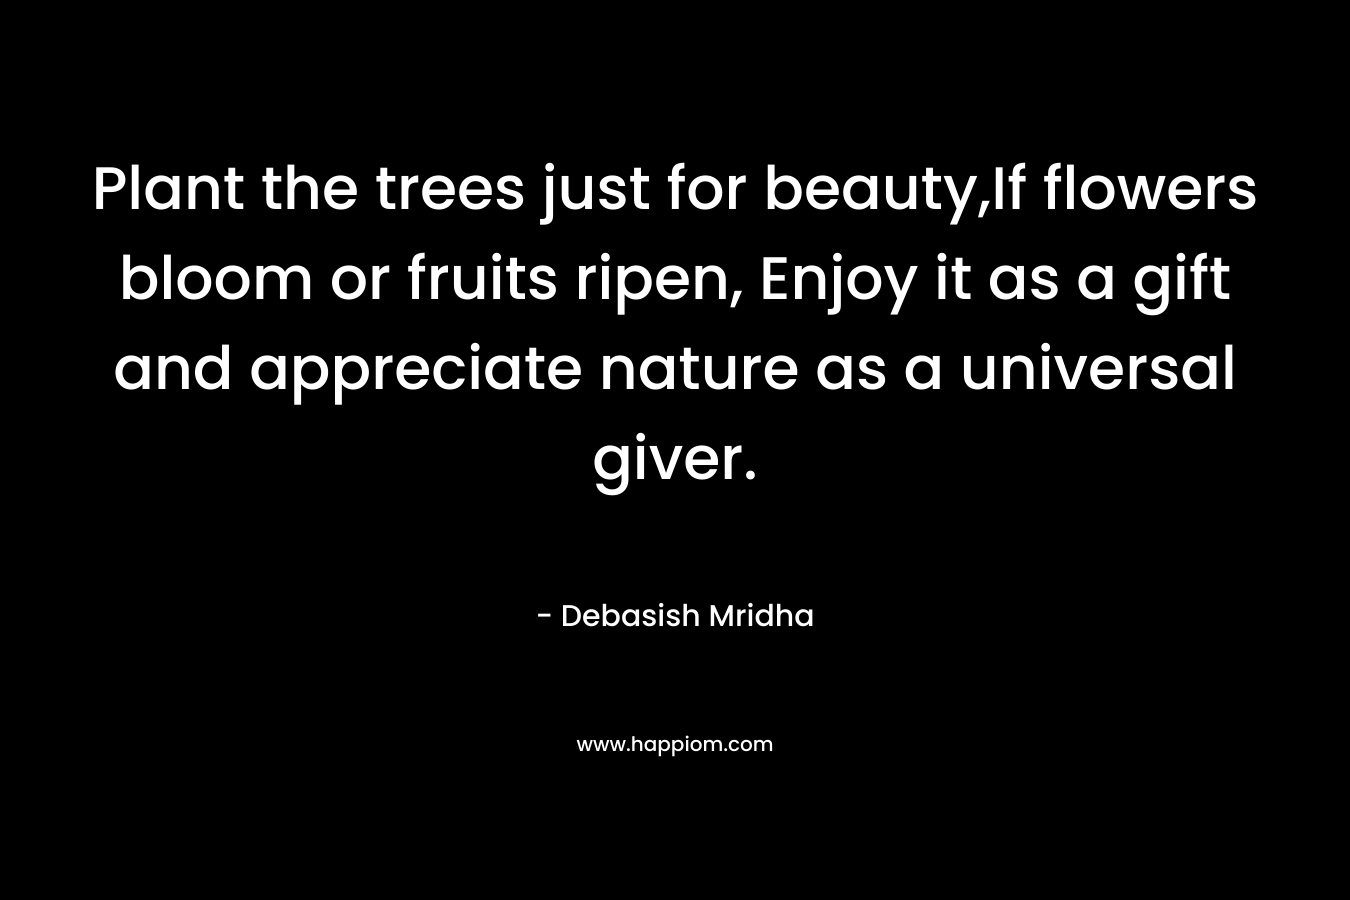 Plant the trees just for beauty,If flowers bloom or fruits ripen, Enjoy it as a gift and appreciate nature as a universal giver.